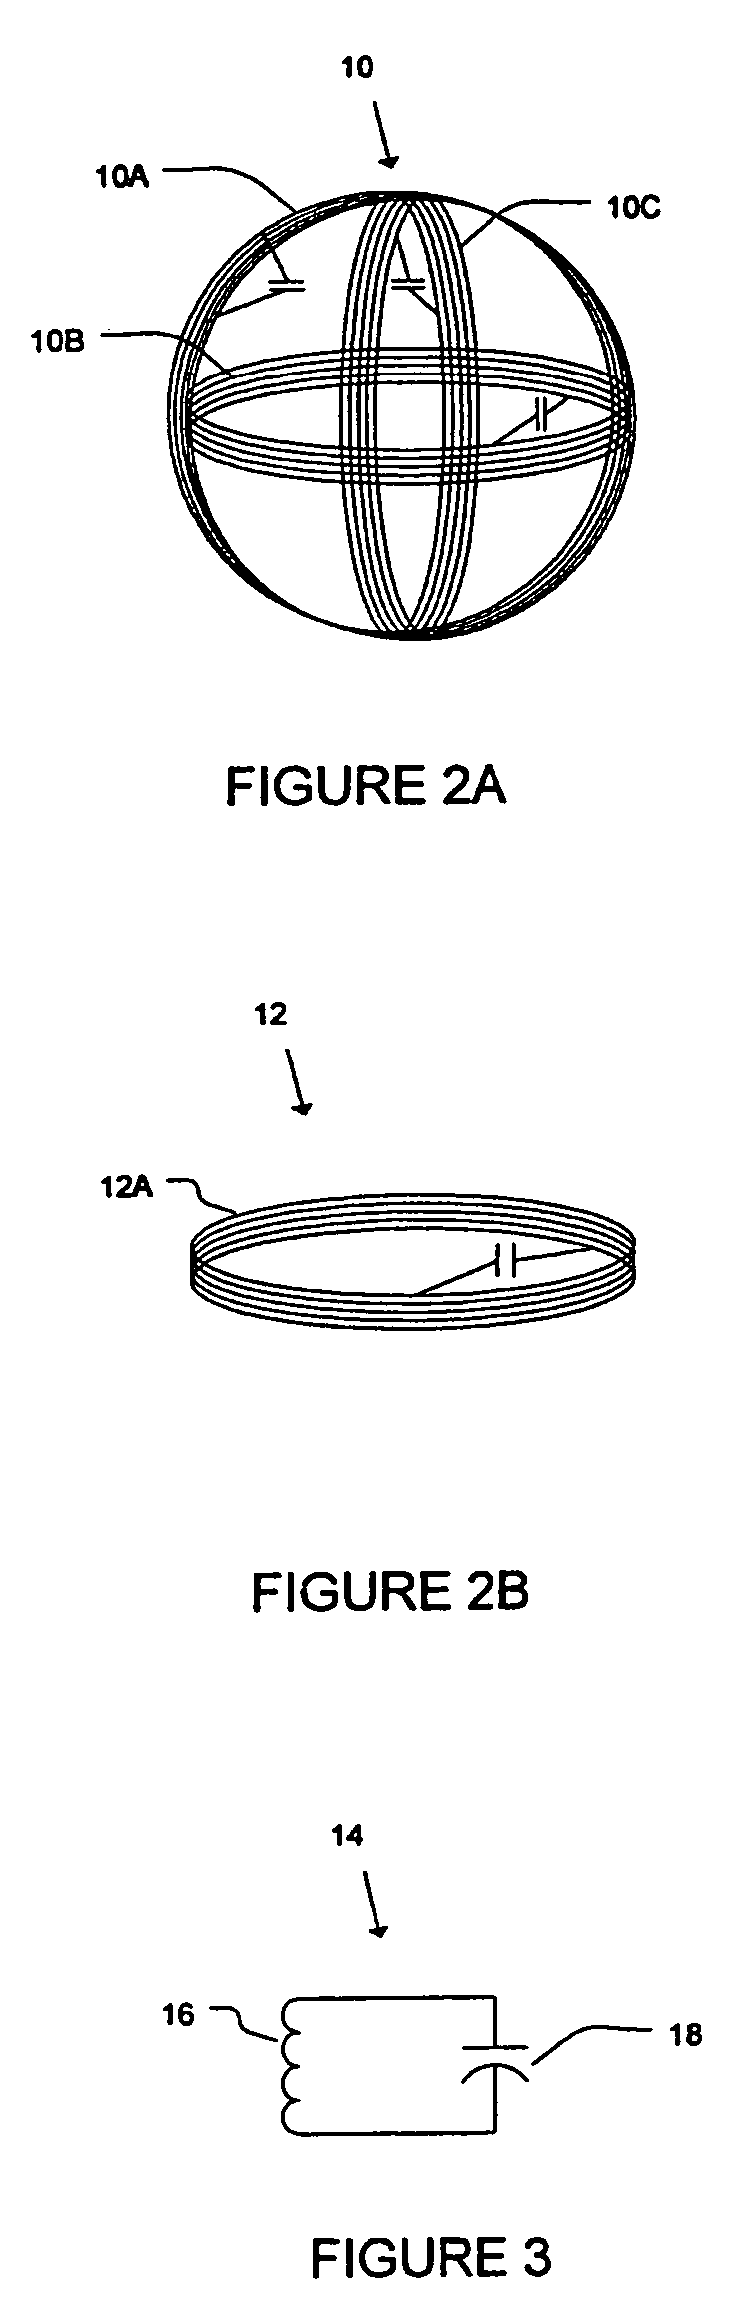 Method and apparatus for digital detection of electronic markers using frequency adaptation